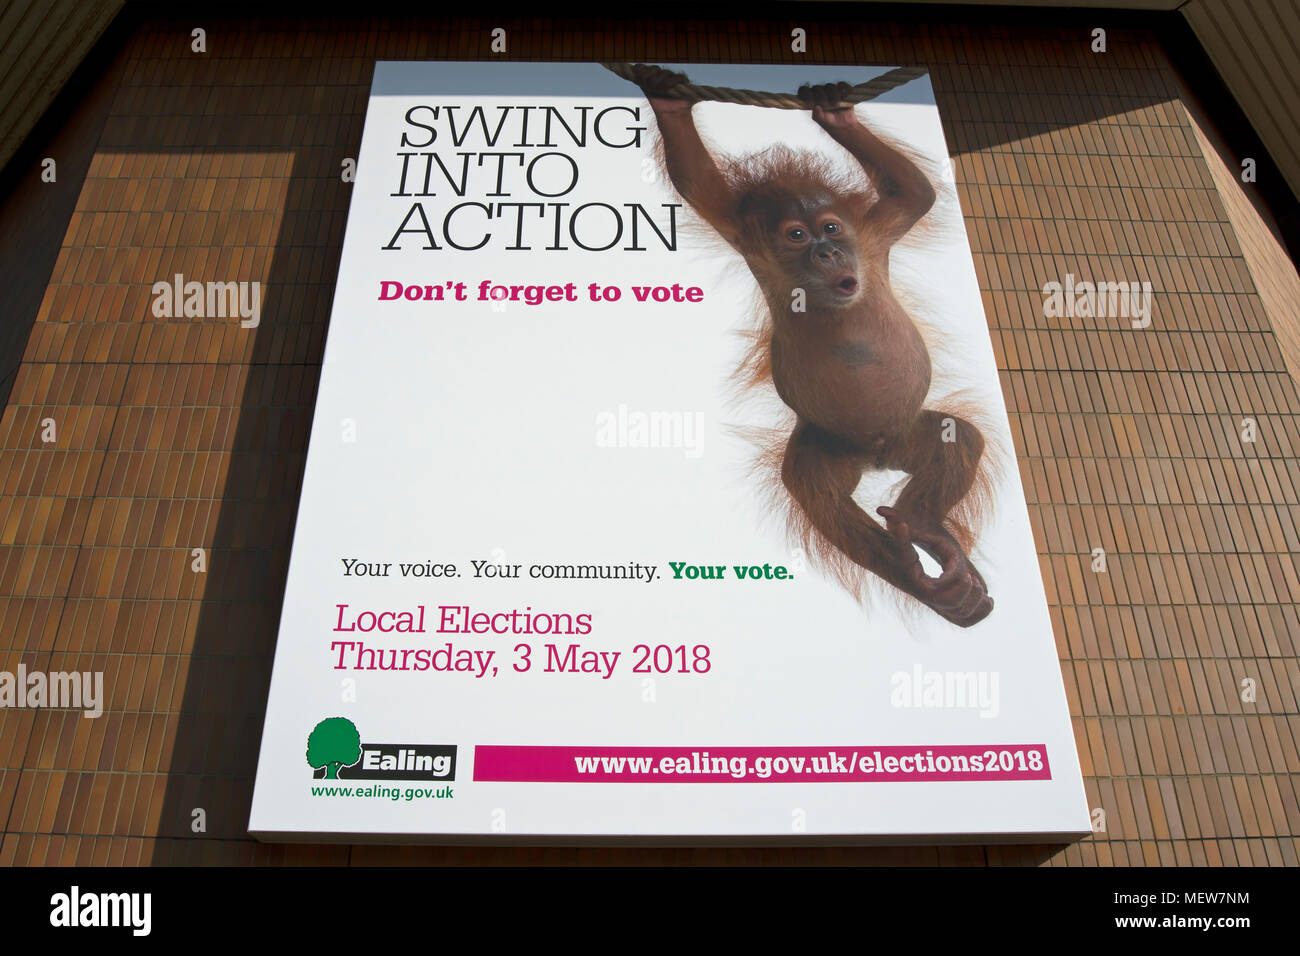 ealing council poster urging people to vote in the local elections of may 2018 Stock Photo